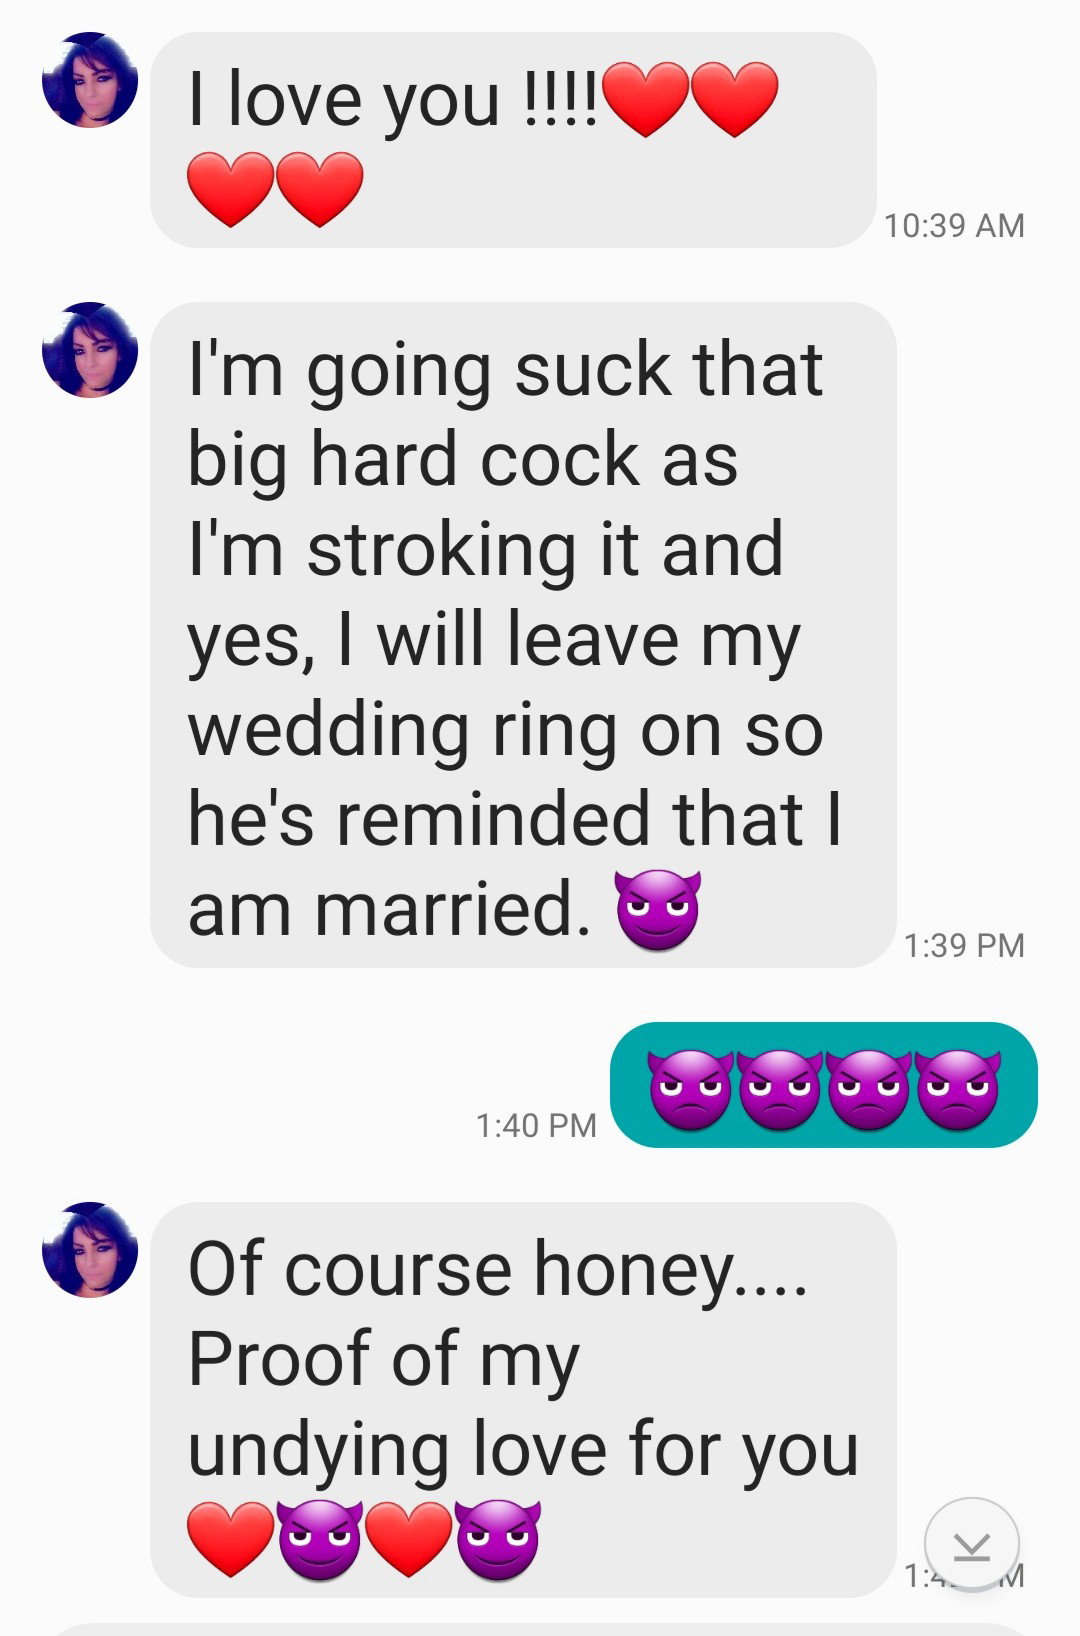 Photo by Sixfive with the username @Sixfive, who is a verified user, posted on September 10, 2019. The post is about the topic Hotwife Texts and the text says 'https://sharesome.com/Blueeyes13 baby do you remember these texts? 🔥🔥🔥👿👿👿❤❤❤'